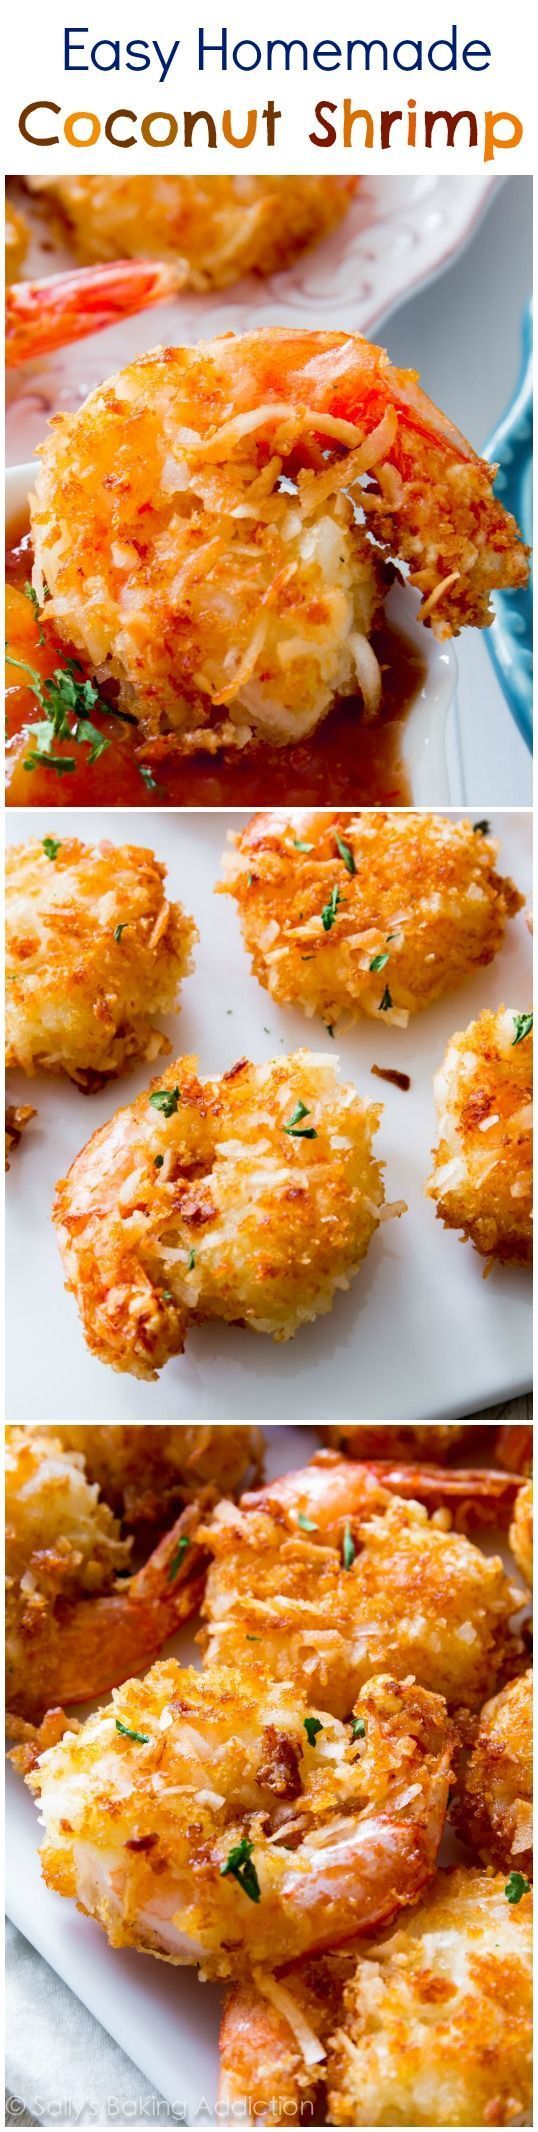 This is the best coconut shrimp recipe Ive tried and you wont believe how easy it